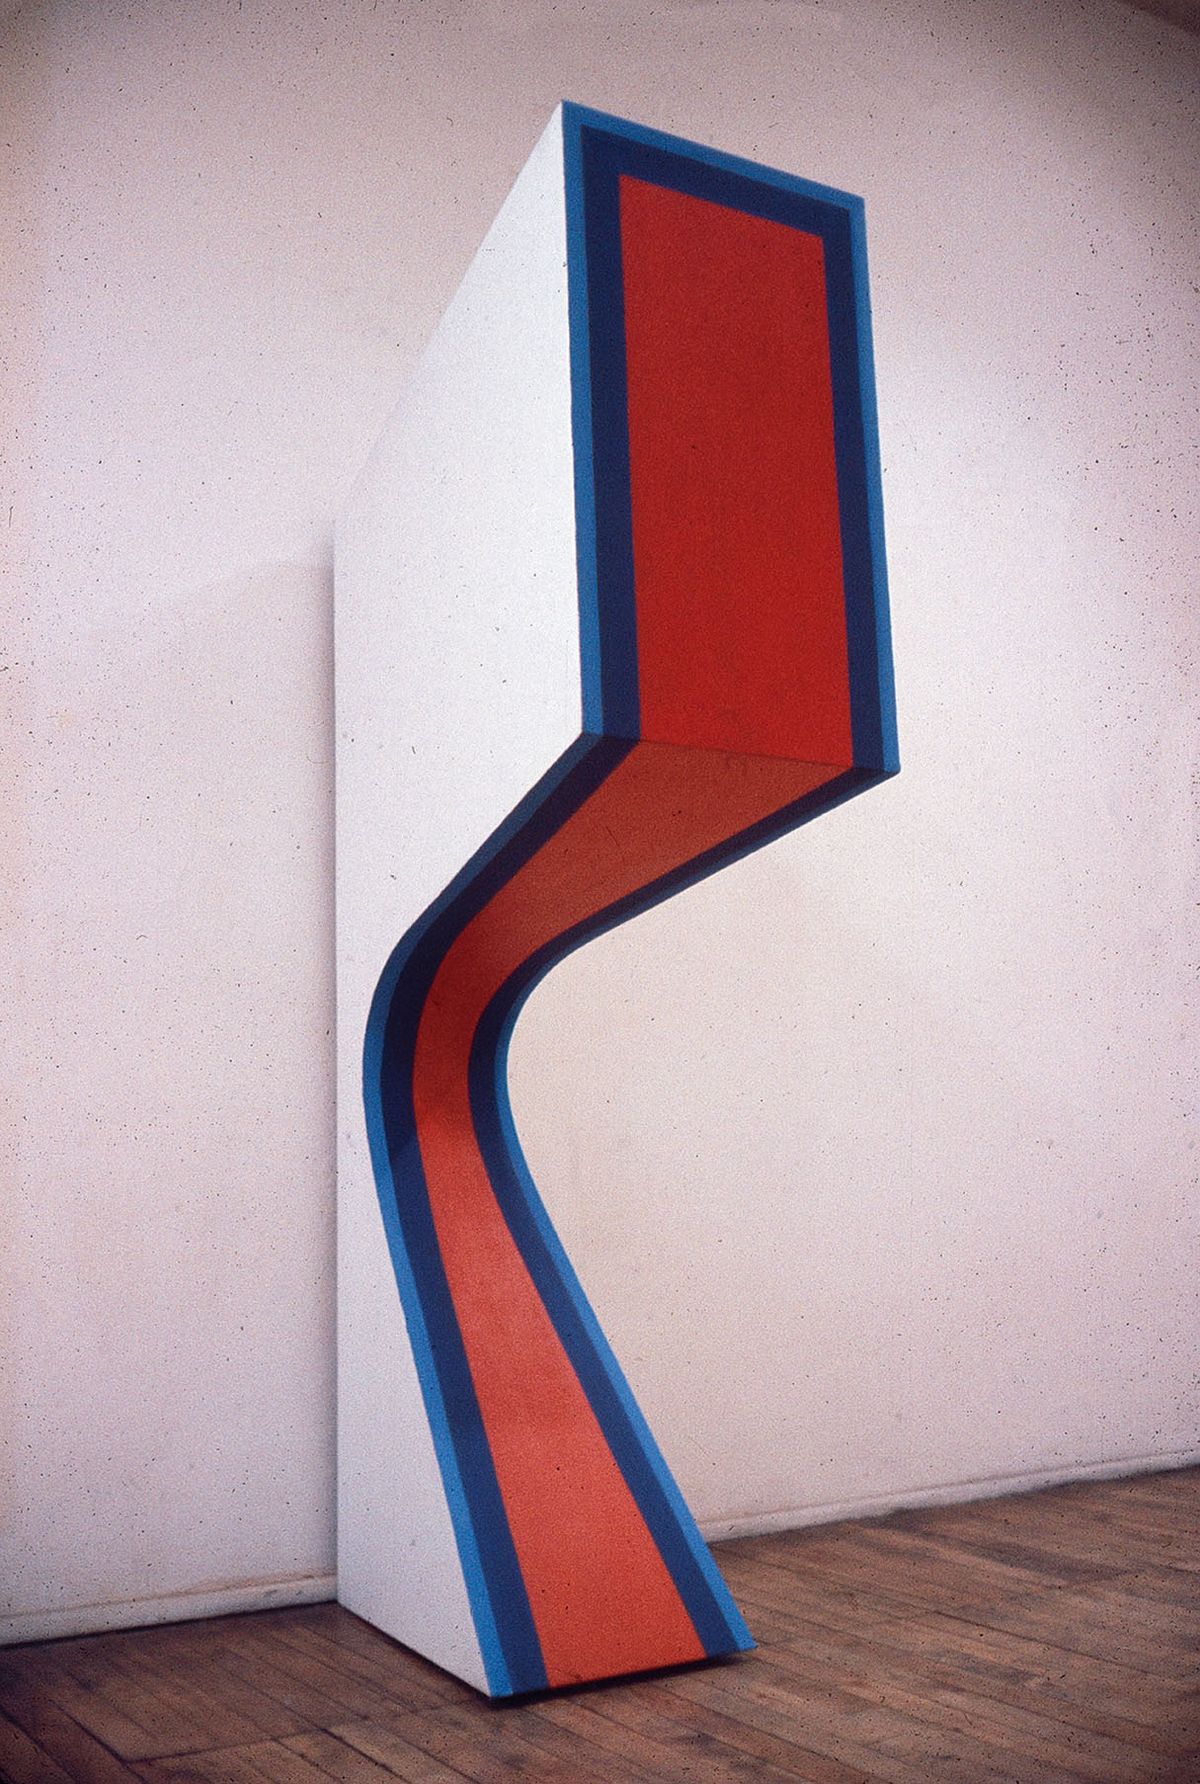 Red Carpet (1965) was one of the three-dimensional “shaped canvases” from Richard Smith’s Sphinxes series Courtesy of Richard Smith Foundation